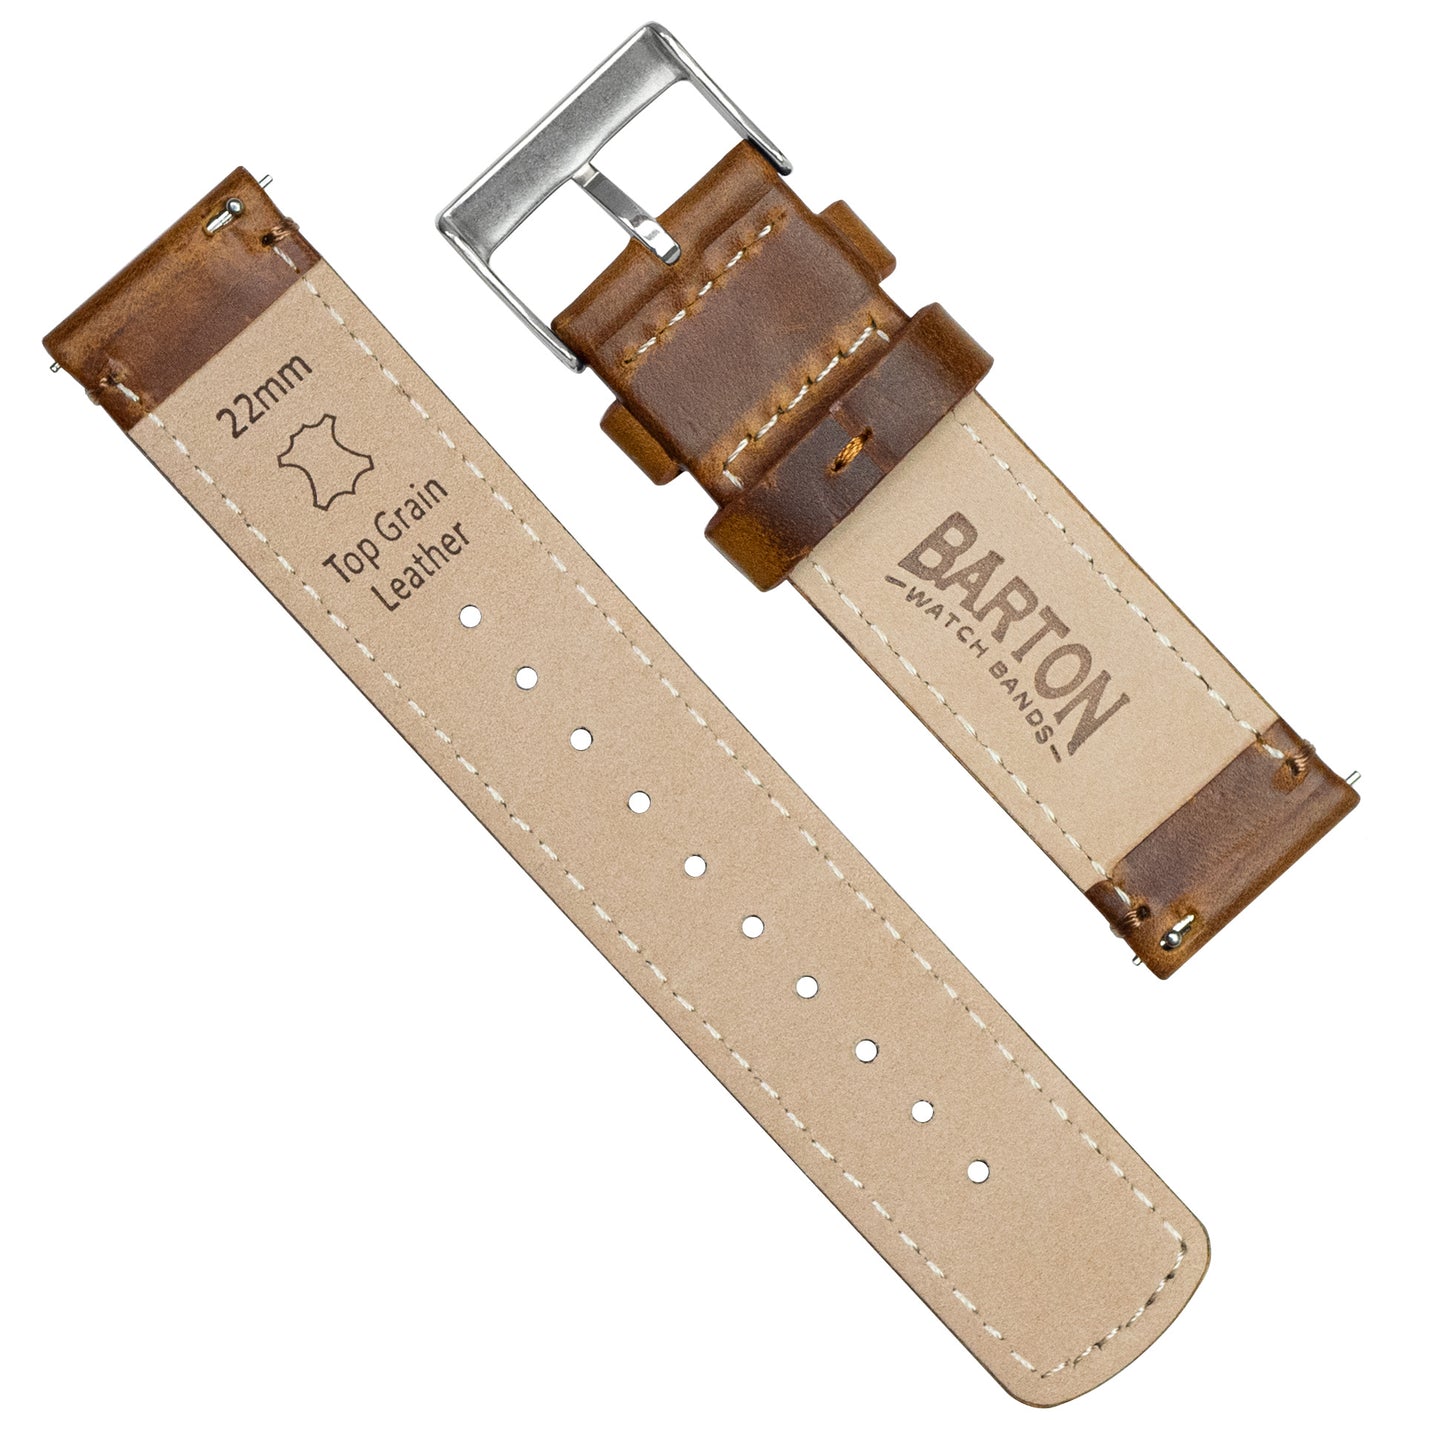 Samsung Galaxy Watch3 | Weathered Brown Leather - Barton Watch Bands